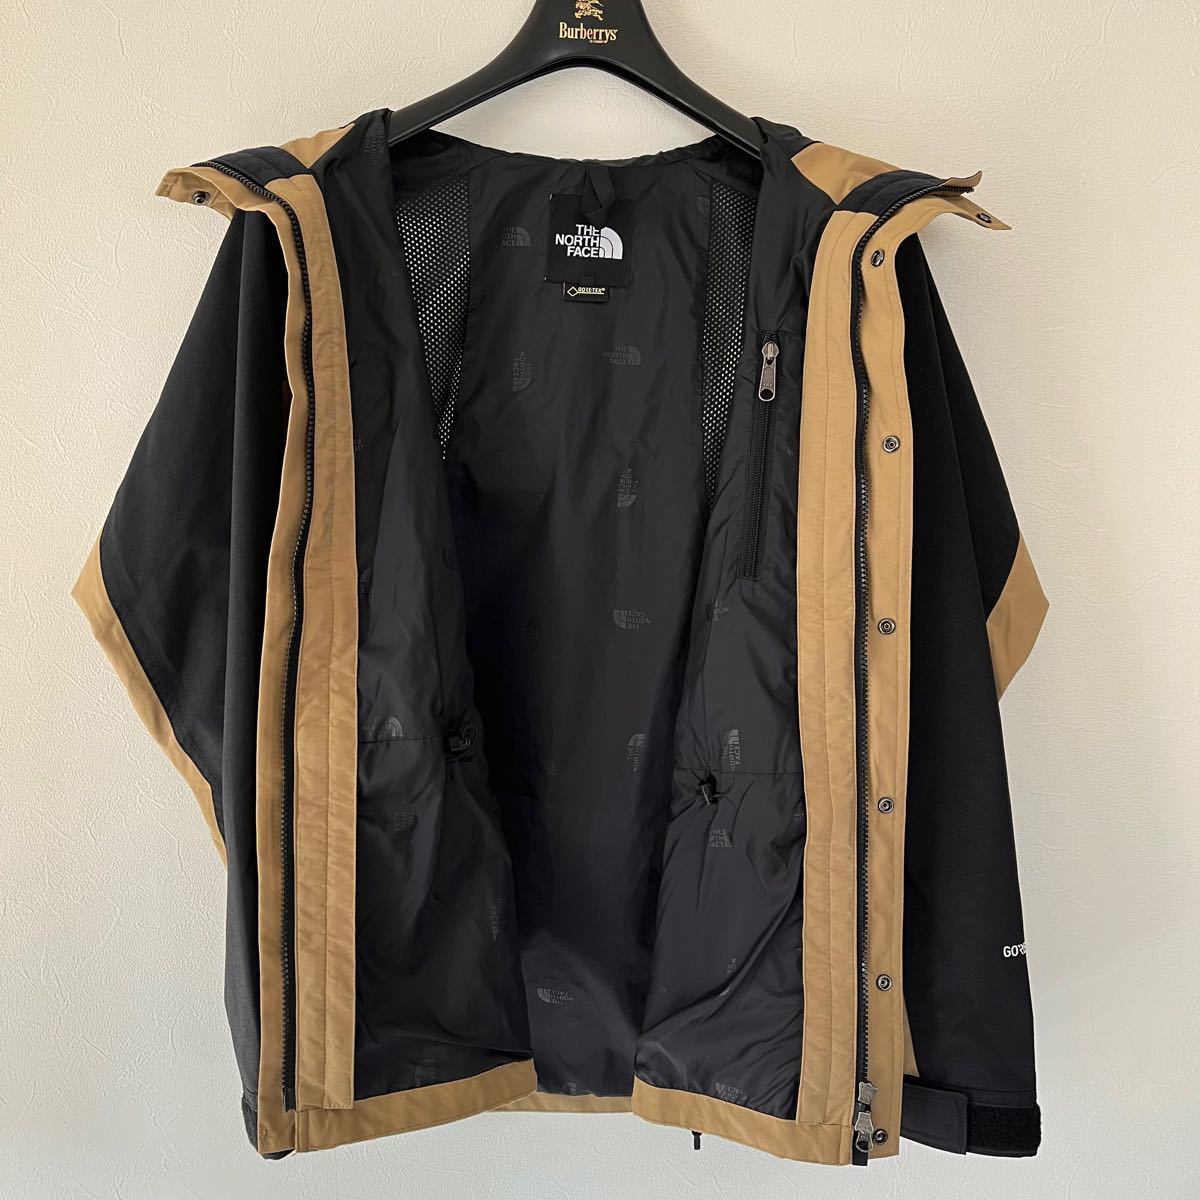 THE NORTH FACE Mountain LIGHT JACKET マウンテンライトジャケット ケルプタン GORE-TEX